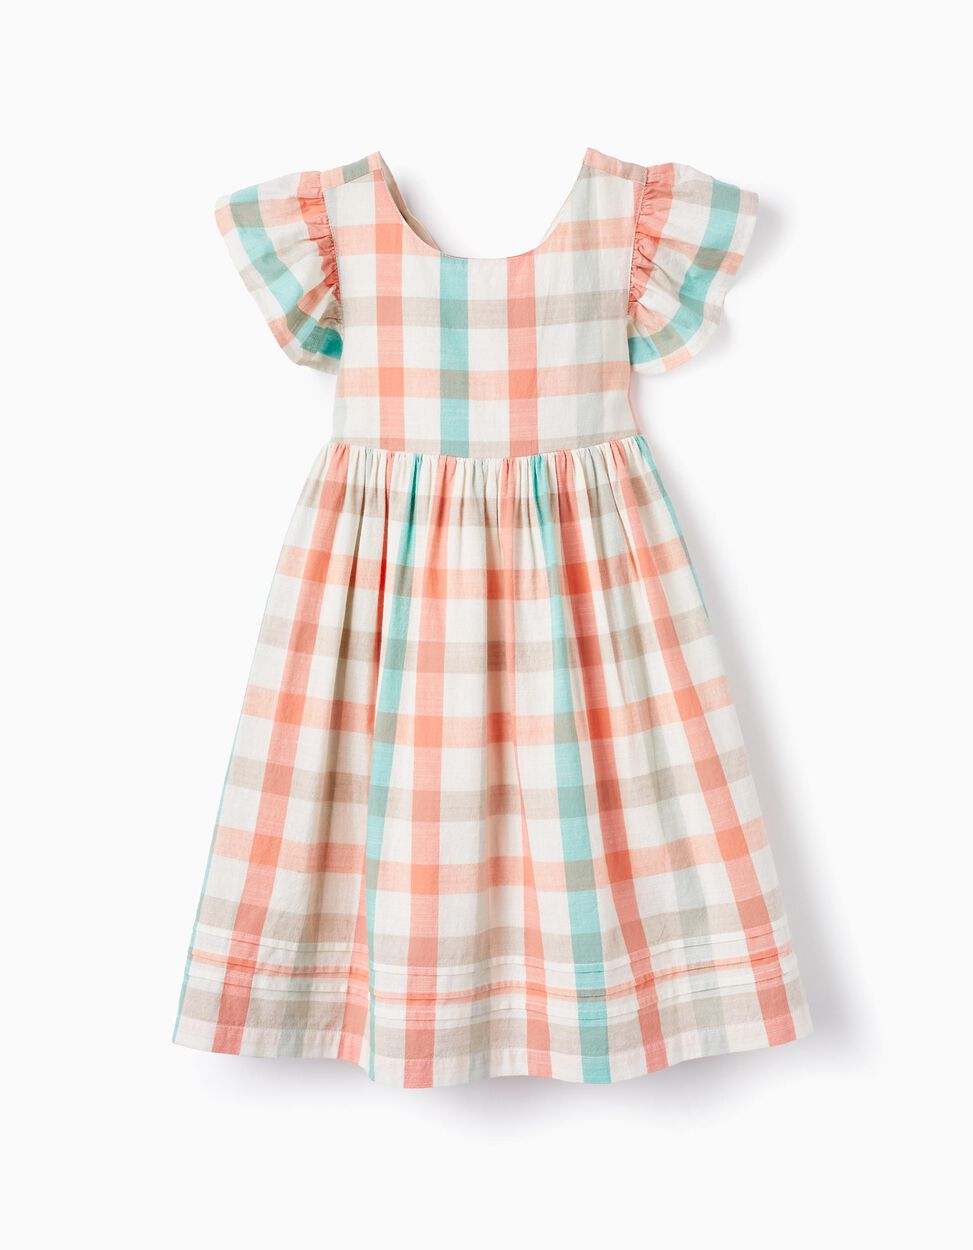 Buy Online Checked dress in cotton for girls 'B&S', Aqua Green/Coral